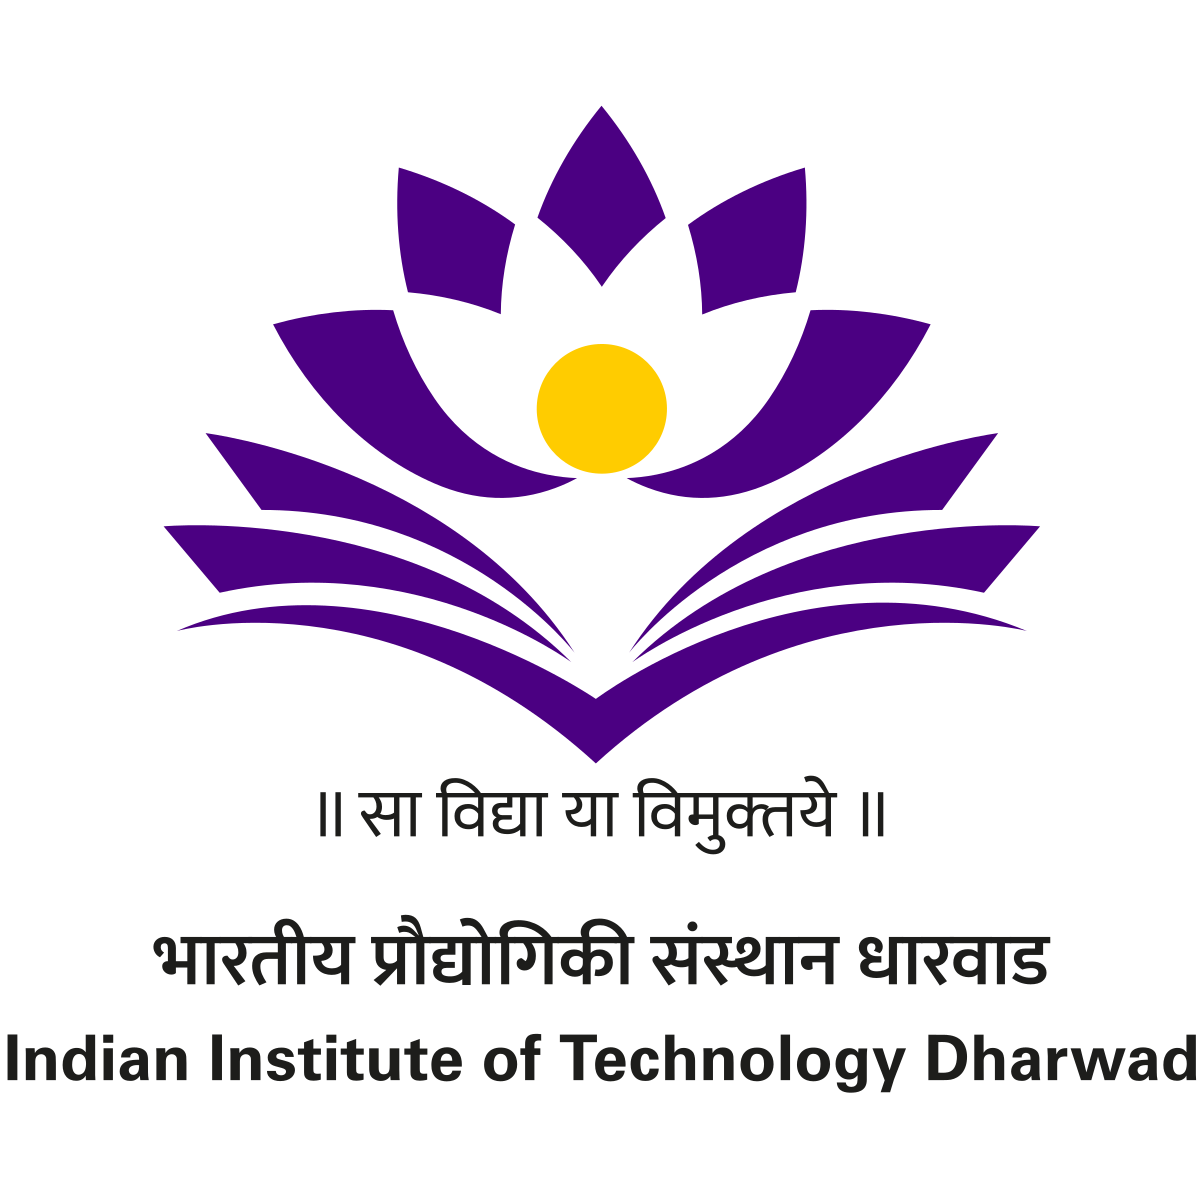 Indian Institute of Technology Dharwad